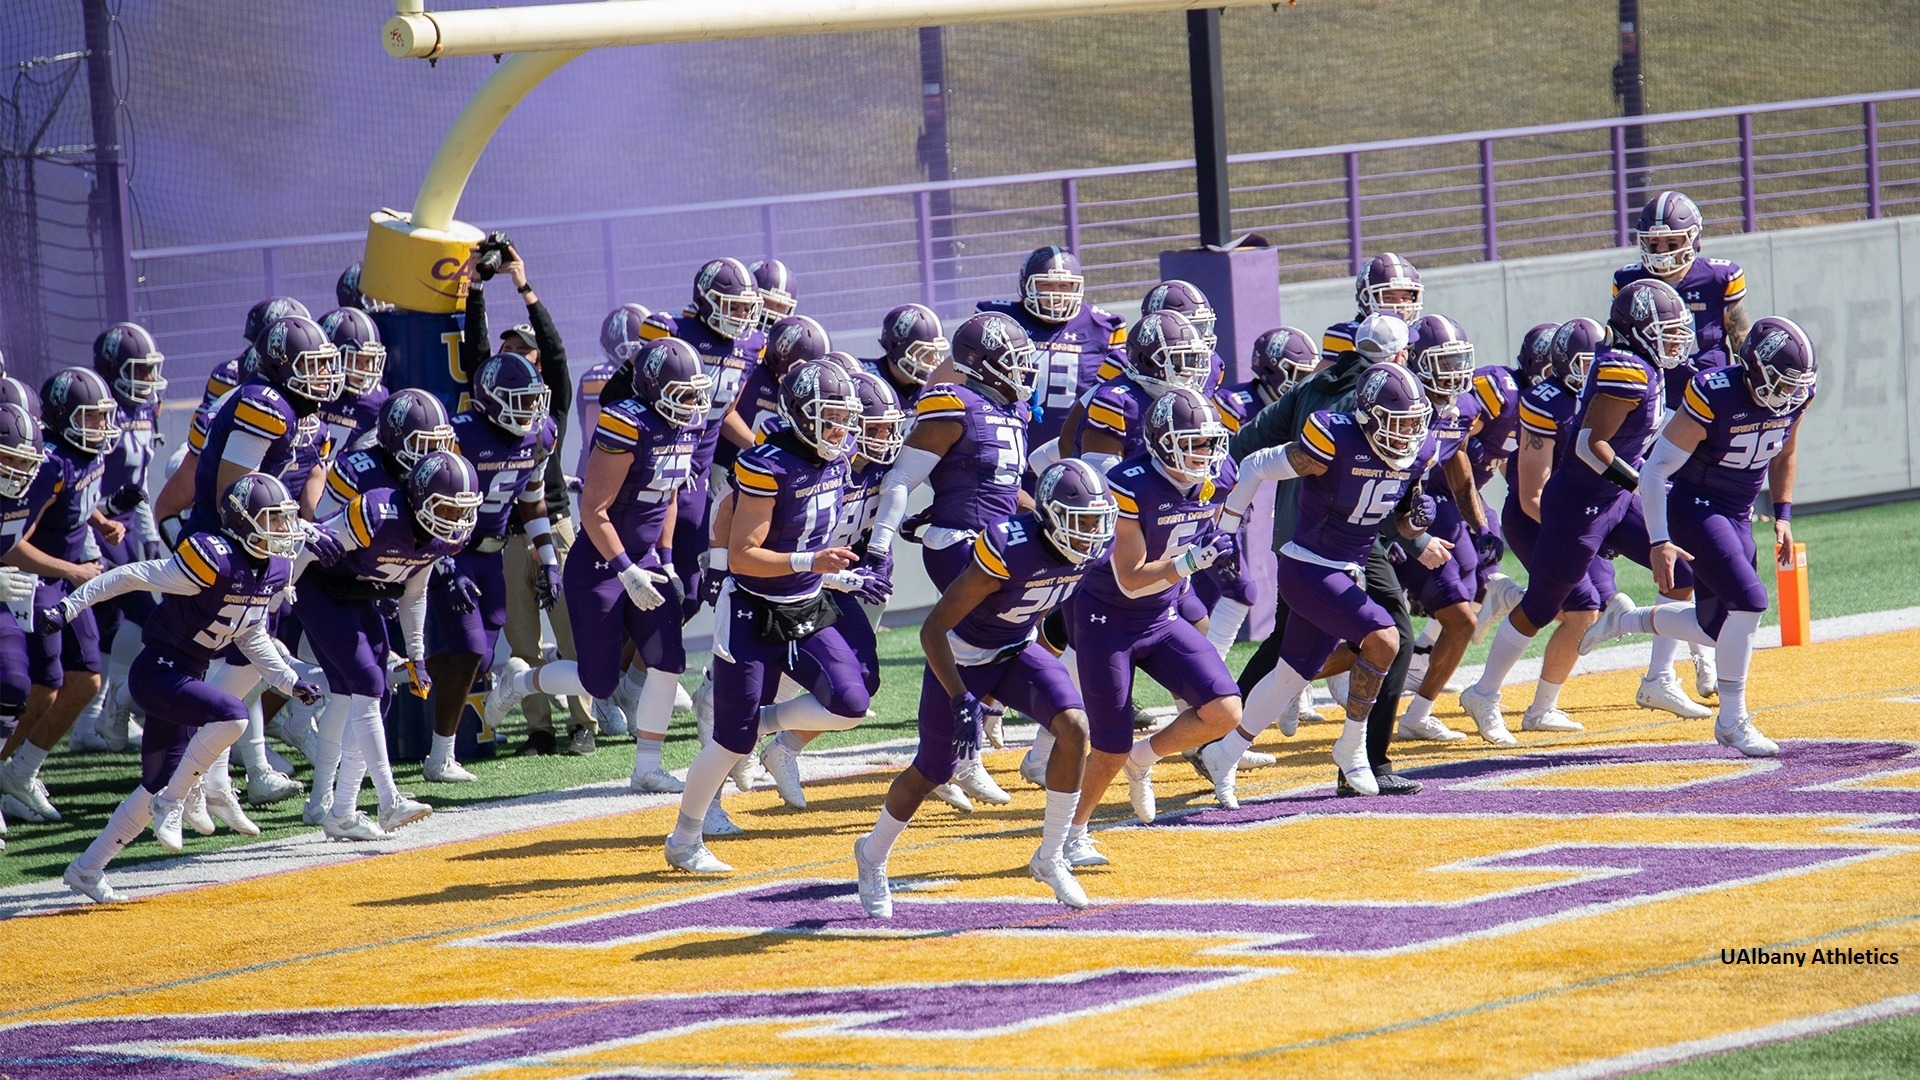 FCS Quarterfinal-Round Playoff Preview and Prediction: UAlbany at Idaho